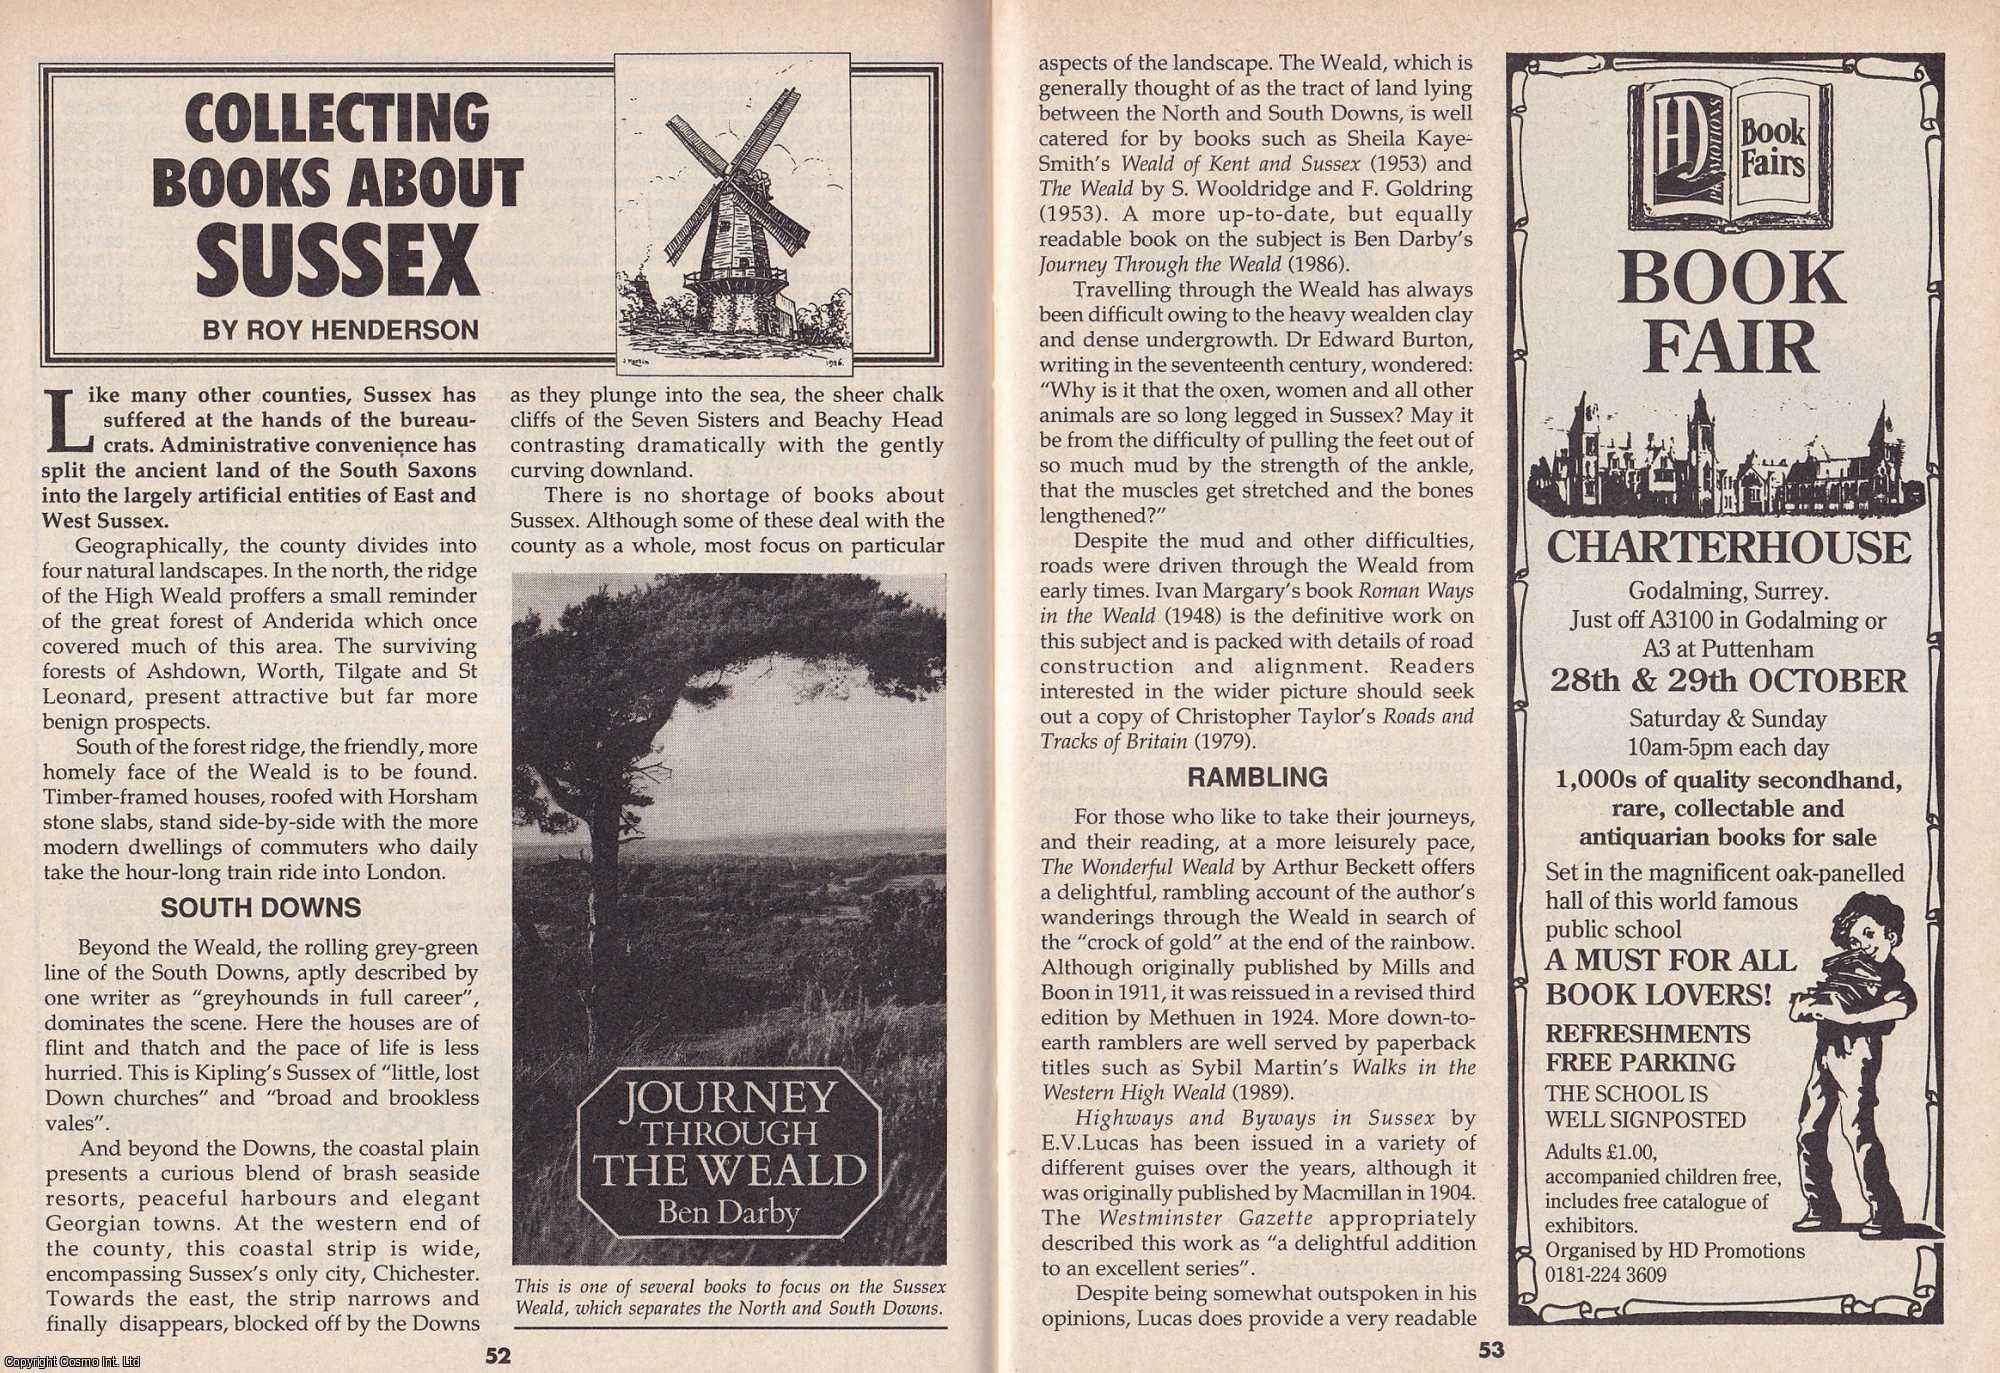 Roy Henderson - Collecting Books about Sussex. This is an original article separated from an issue of The Book & Magazine Collector publication.